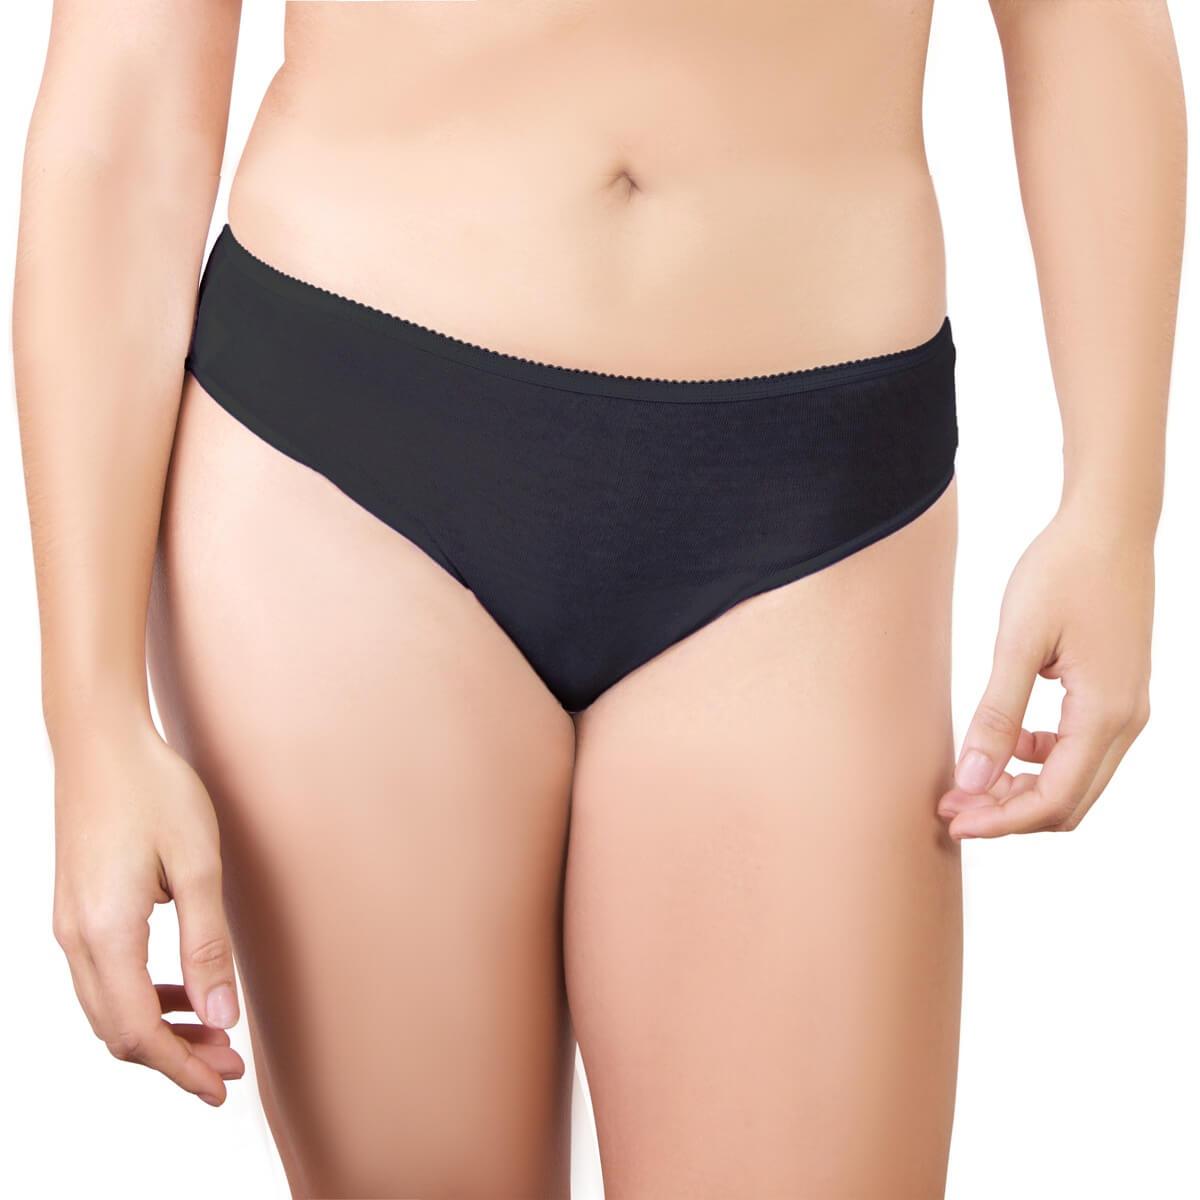 http://owtravelproducts.com/cdn/shop/products/One-Wear_Disposable_Briefs_Knickers_Panties_for_Maternity_Hospital_Travel_and_Post_Pregnancy_-_Cotton_Black_-_Super_Soft_Disposable_Cotton_Underwear.jpg?v=1652458651